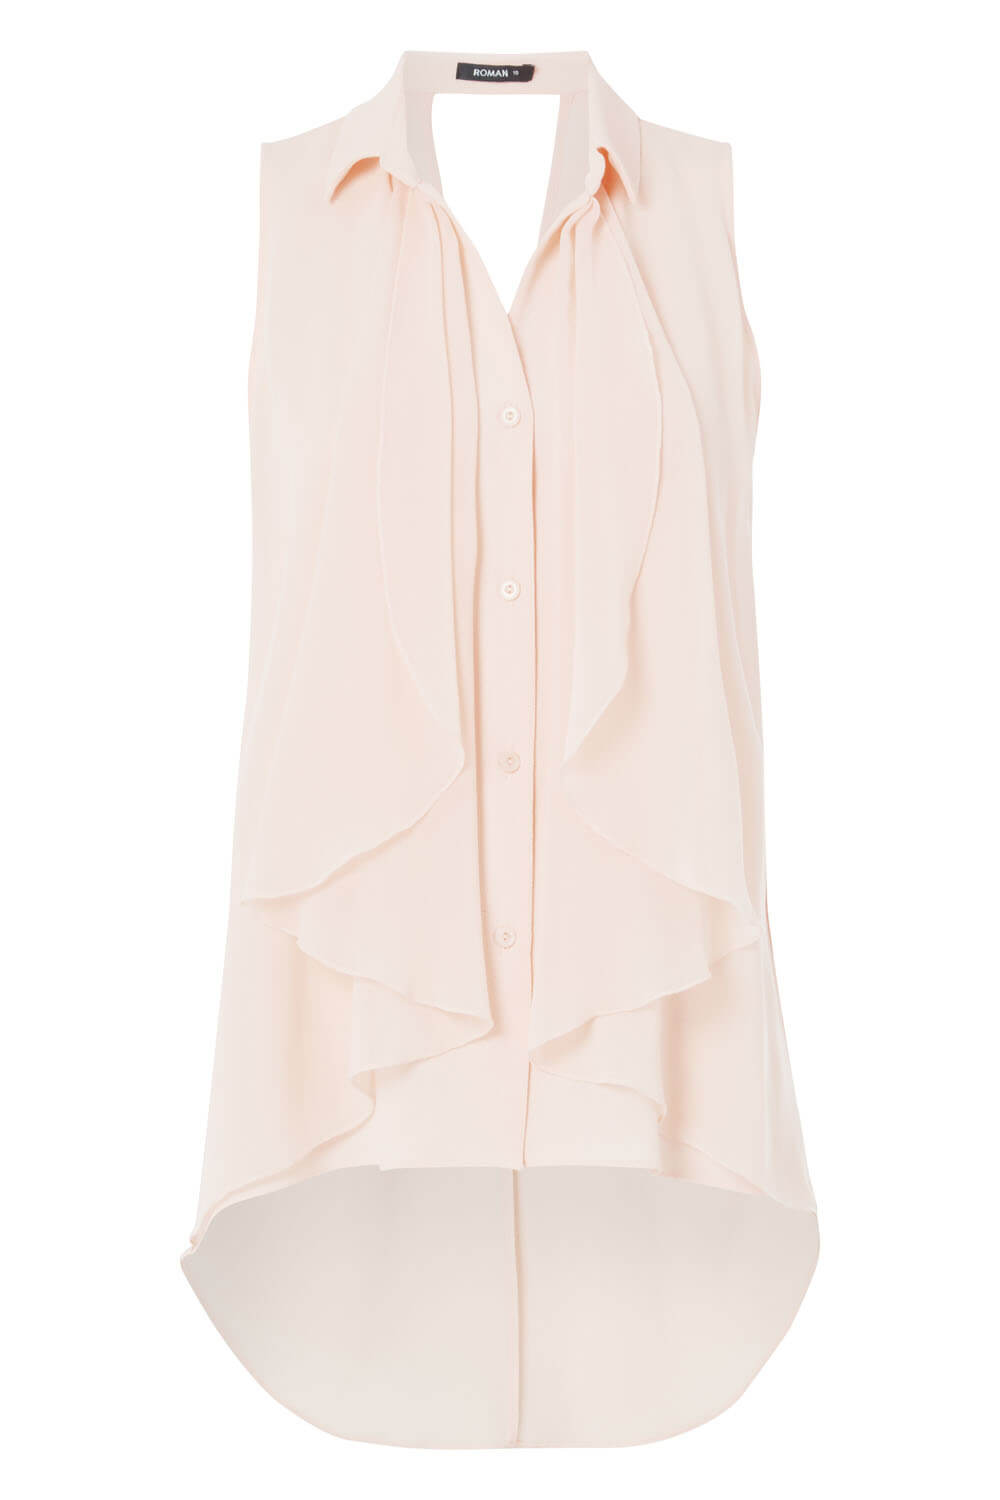 Light Pink Waterfall Front Button Up Blouse, Image 5 of 5